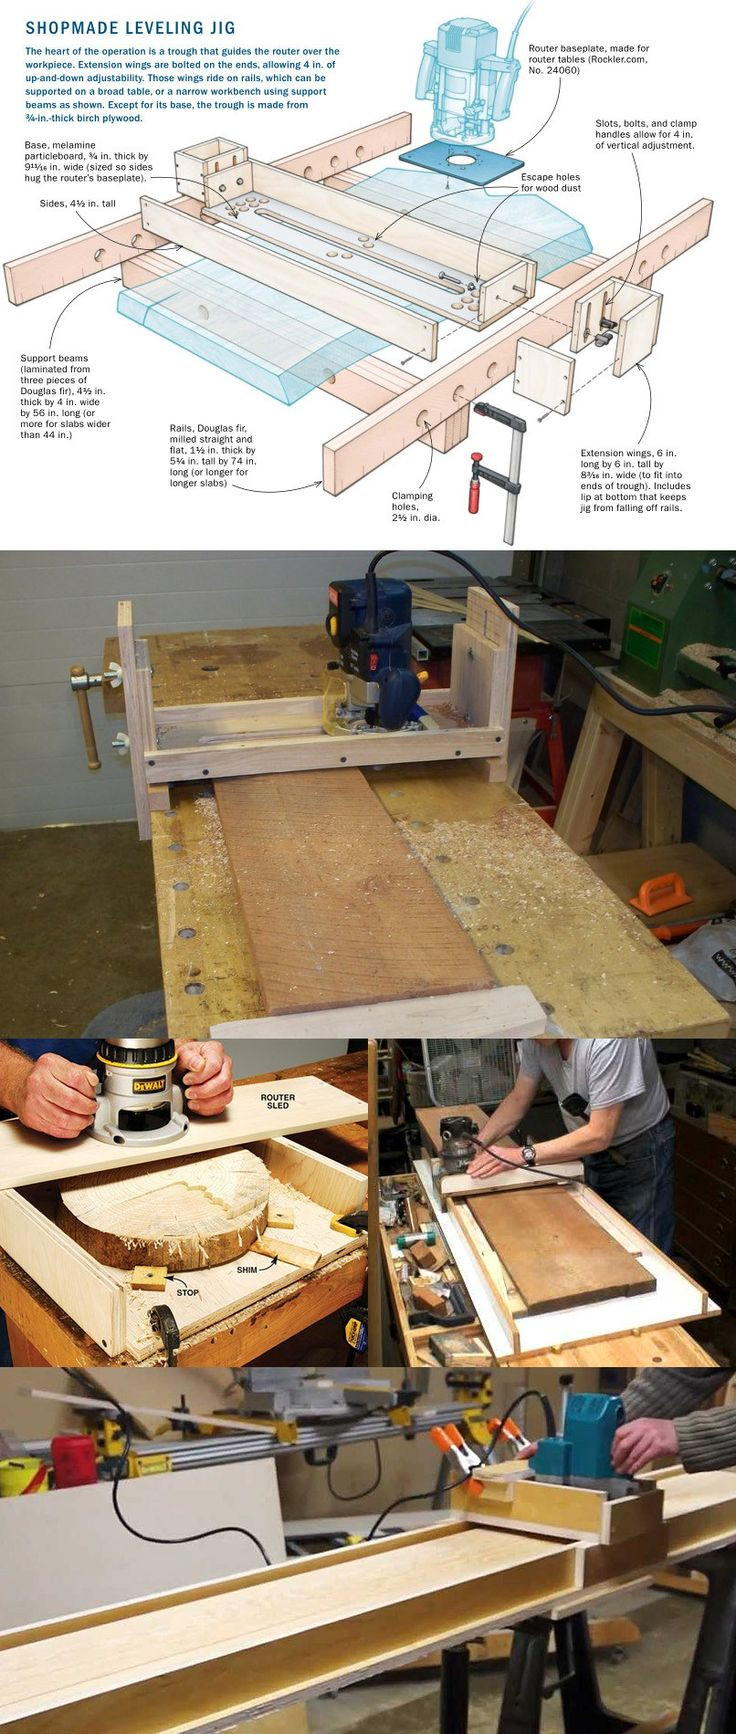 25 Perfect How to Make Wood Filler with Sawdust for Hardwood Floors 2024 free download how to make wood filler with sawdust for hardwood floors of 3739 best diy how to images on pinterest woodwork carpentry and regarding ive seen a lot of jigs to do edge jointing on a table sa